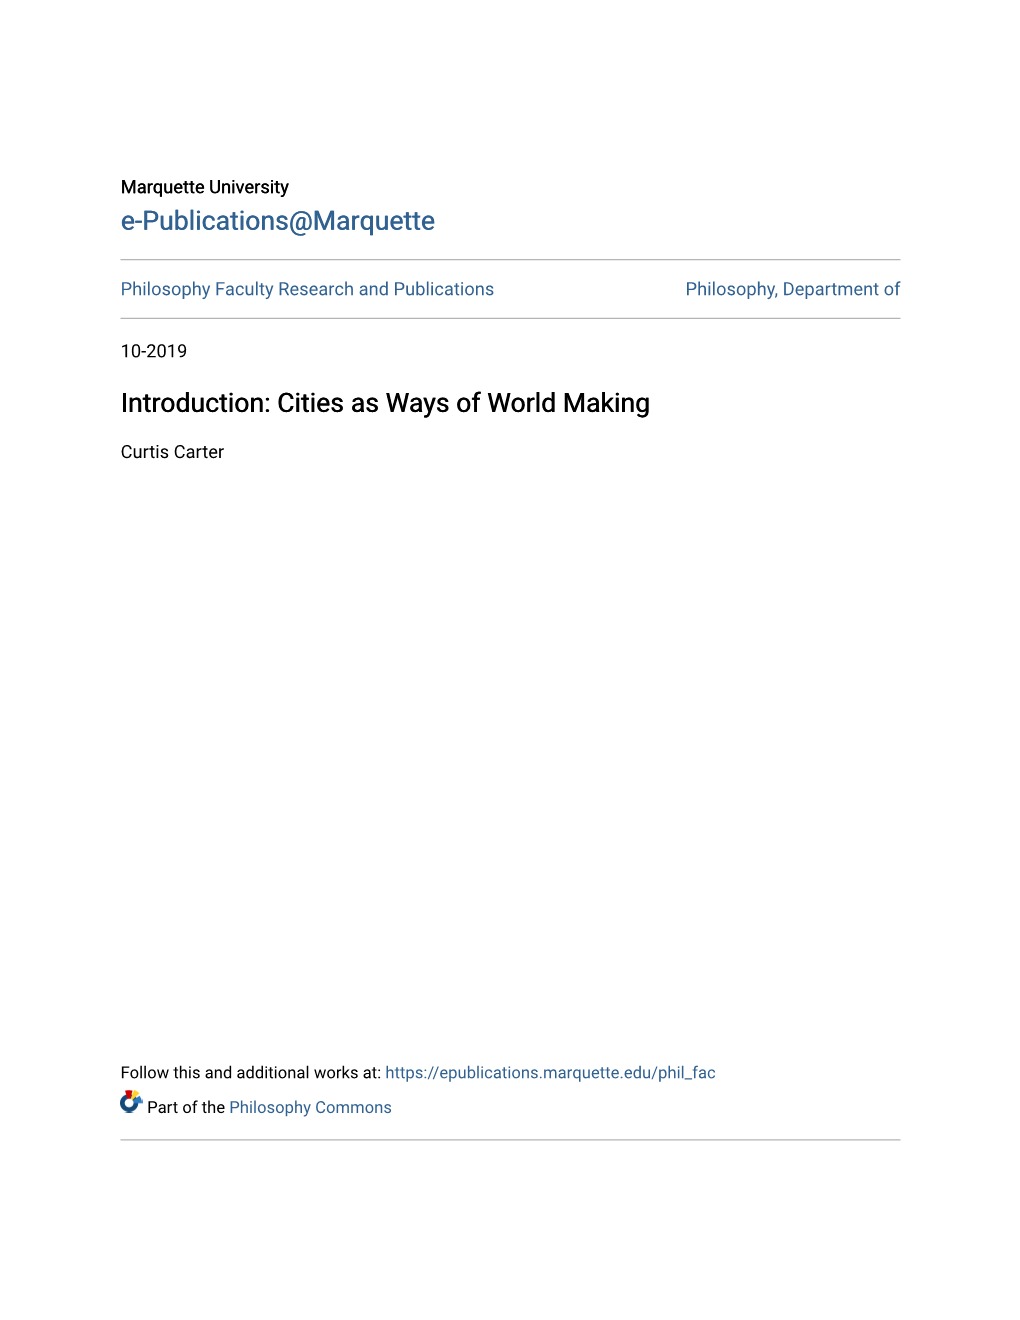 Introduction: Cities As Ways of World Making